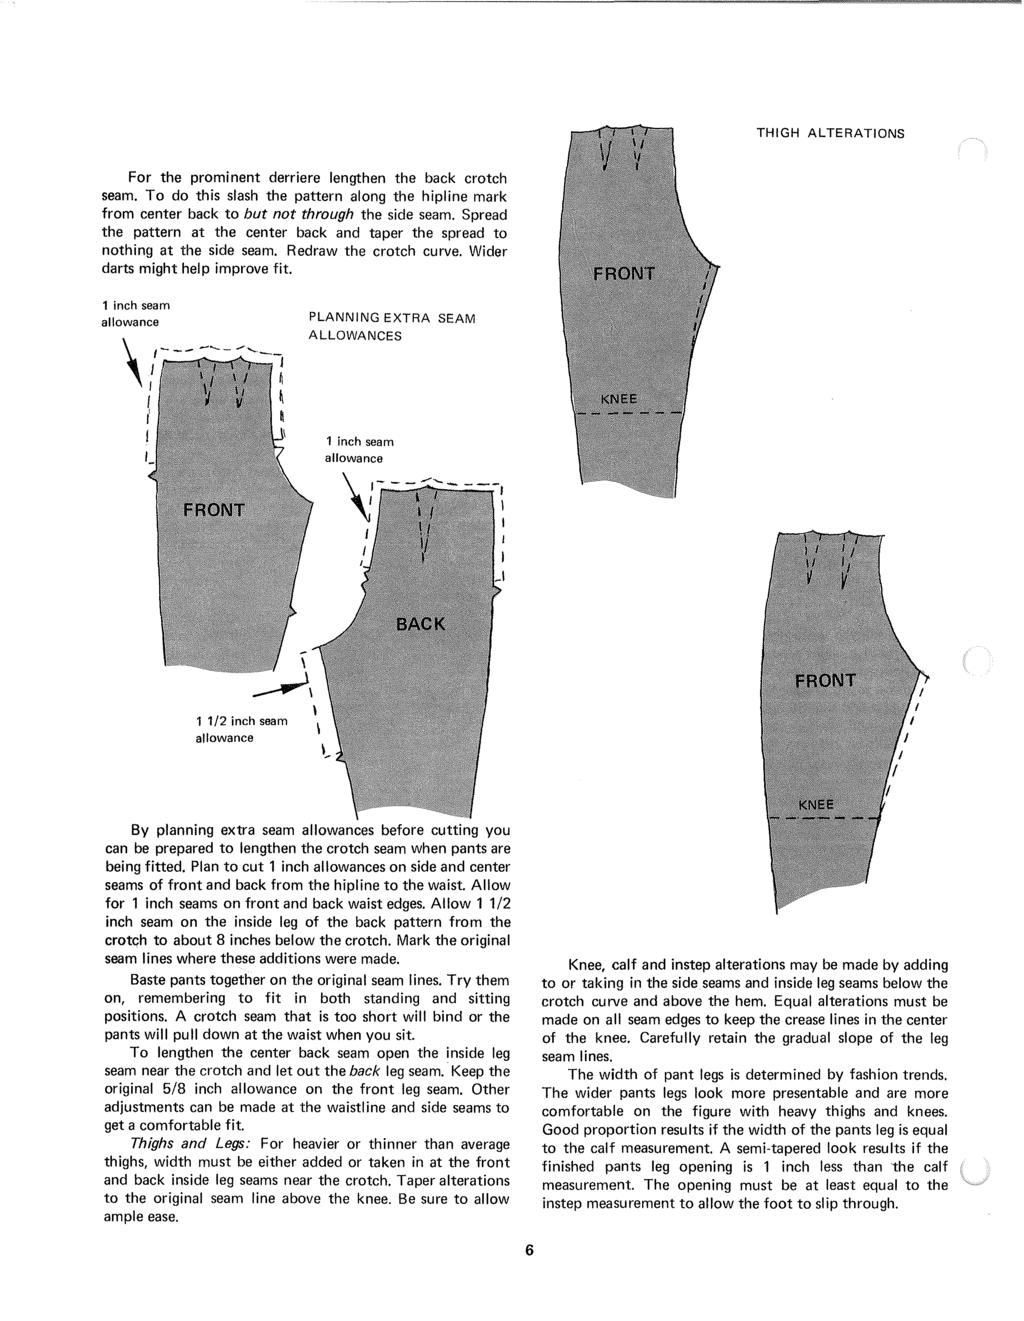 THIGH ALTERATIONS For the prominent derriere lengthen the back crotch seam. To do this slash the pattern along the hipline mark from center back to but not through the side seam.